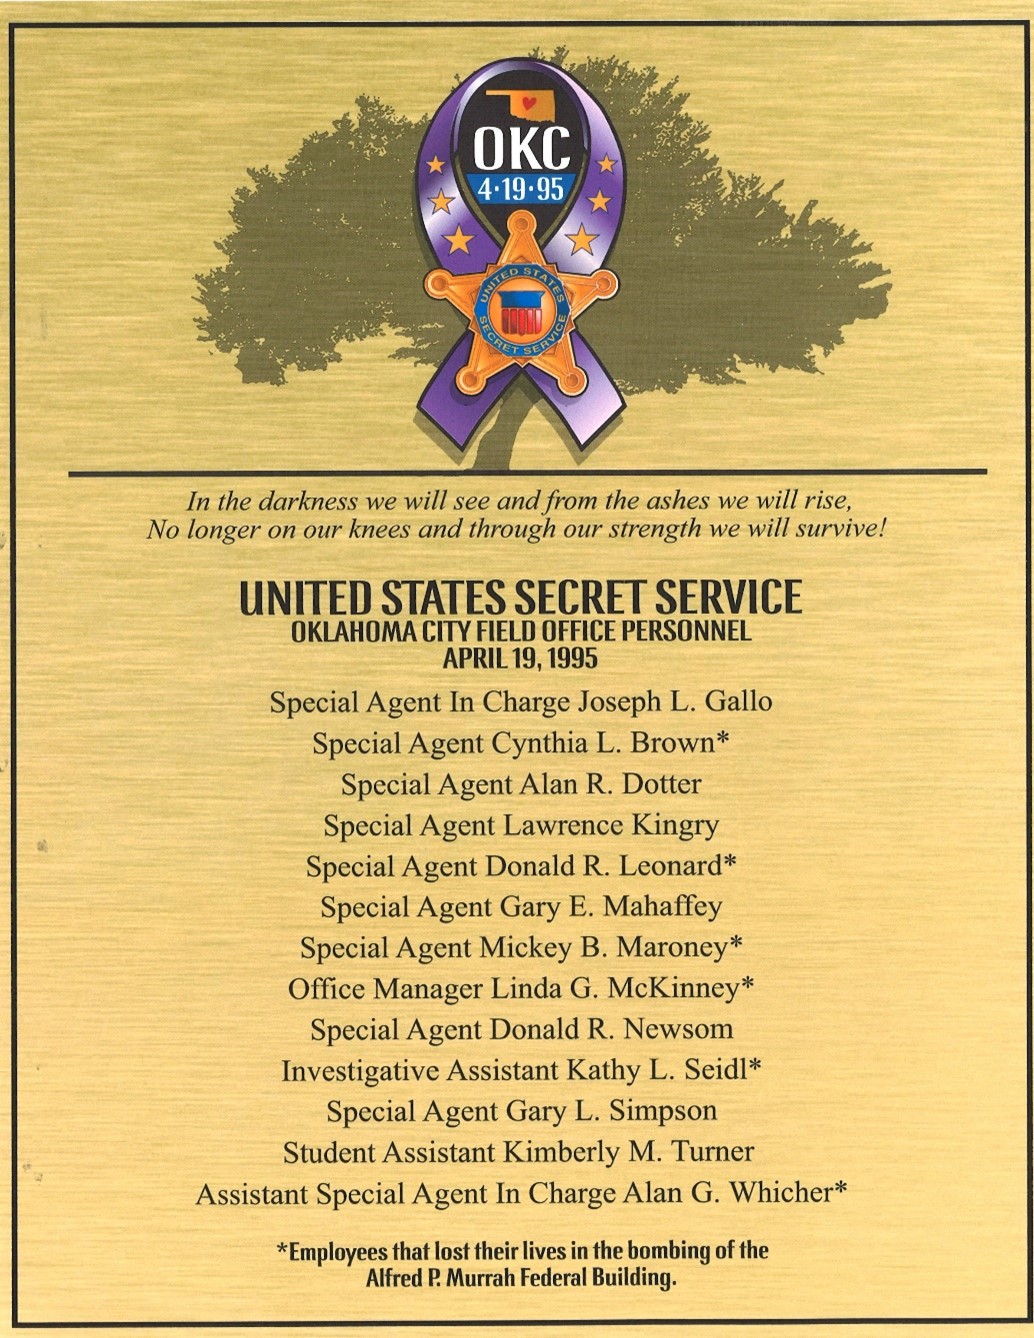 Plaque commemorating the Secret Service victims of the April 19, 1995, Oklahoma City bombing.